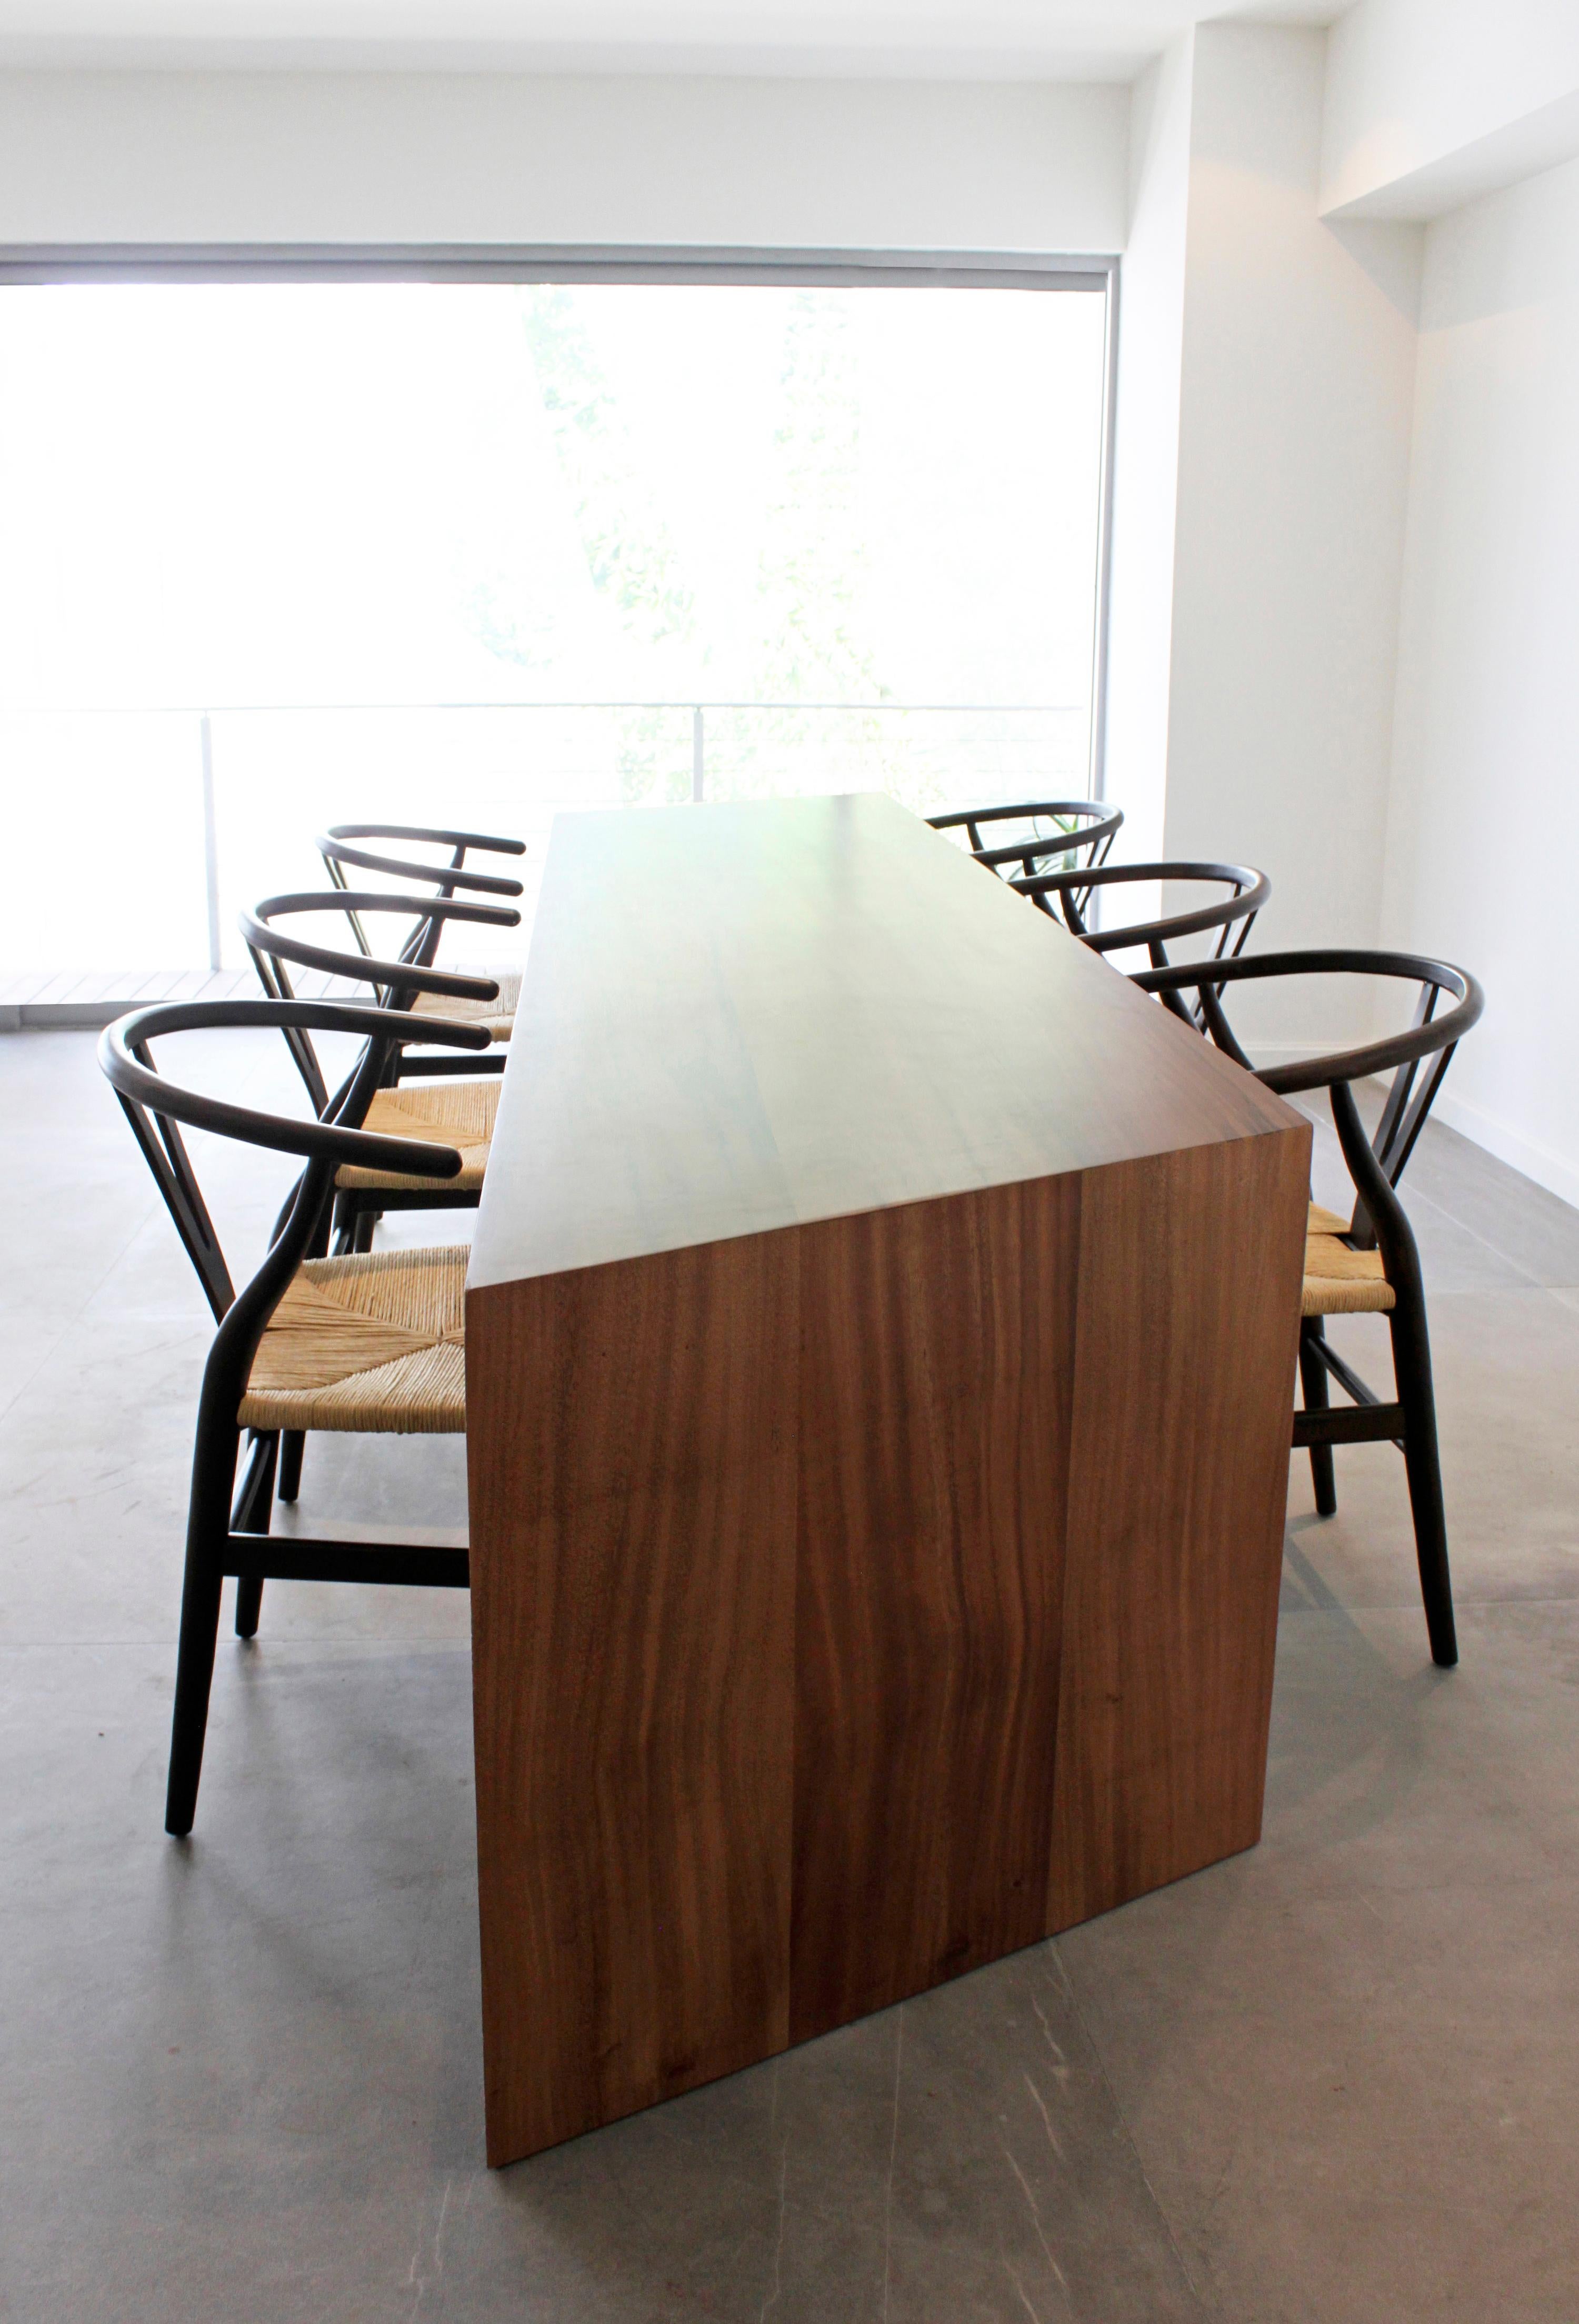 Wood La Desviada Tall Table and Desk by Maria Beckmann, Represented by Tuleste Factor